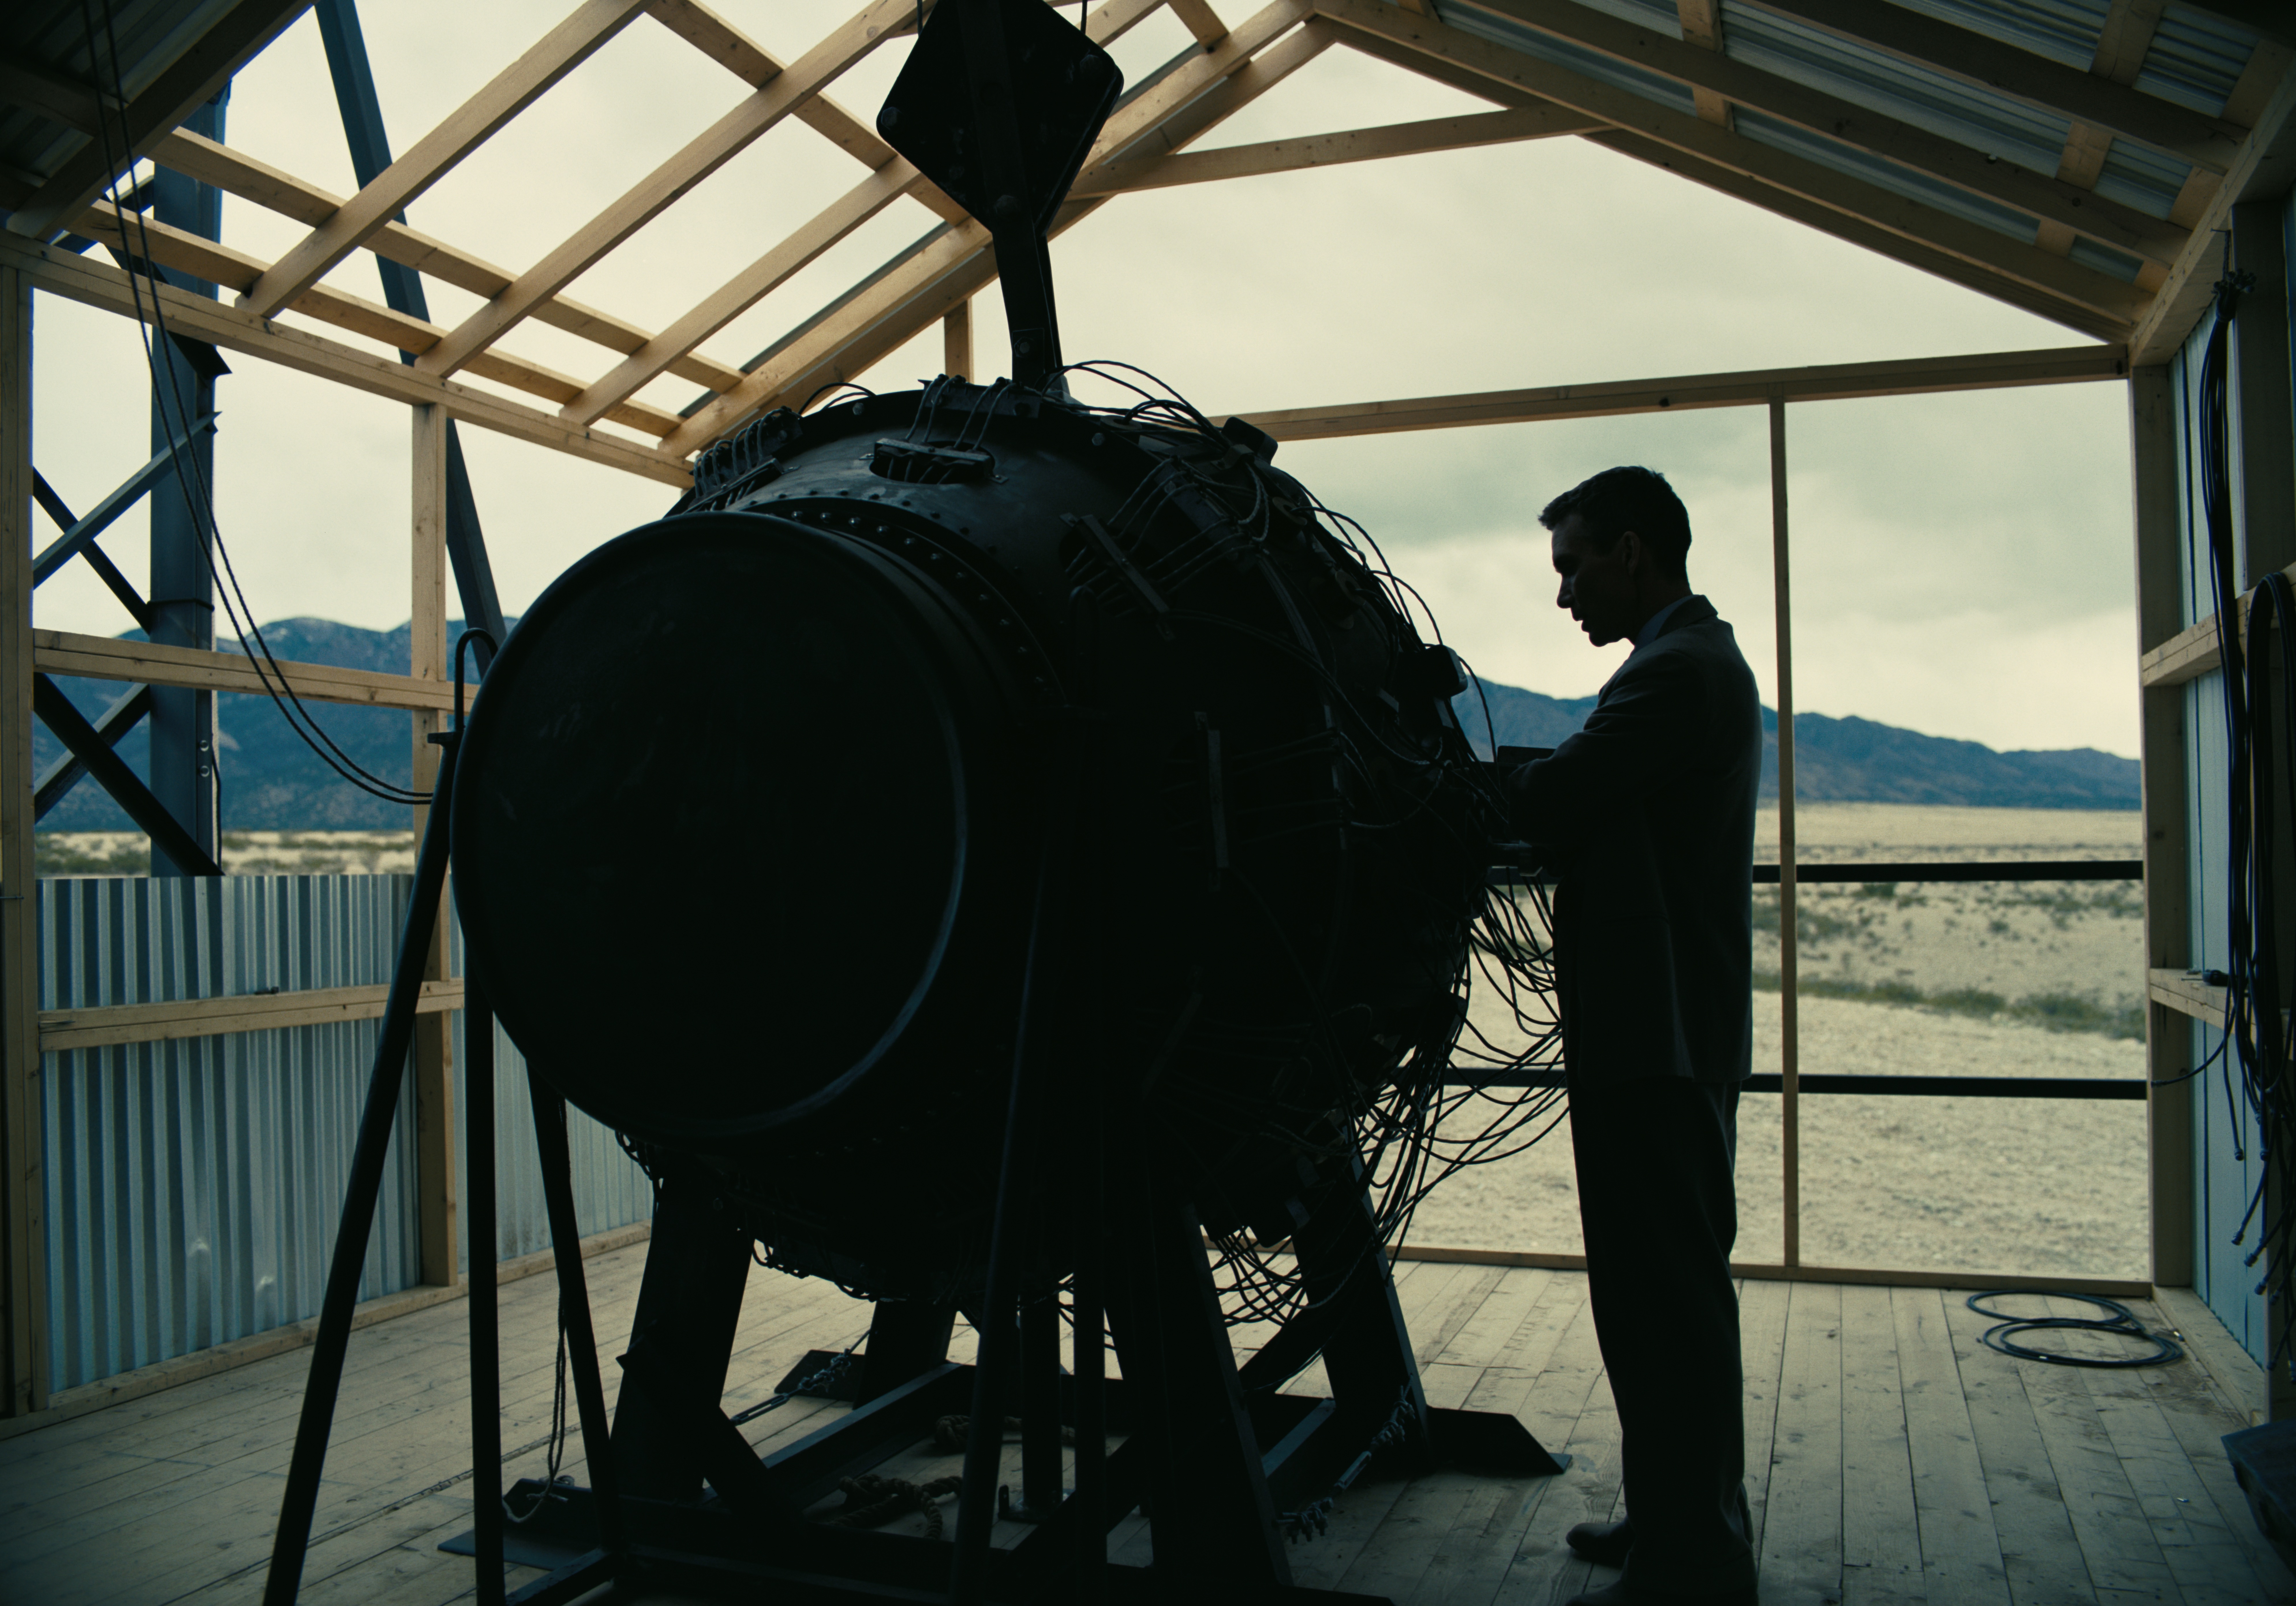 Silhouette of a man resembling an actor, standing next to a large scientific apparatus in a wooden structure, with mountains in the background, as a cinematic HD desktop wallpaper.